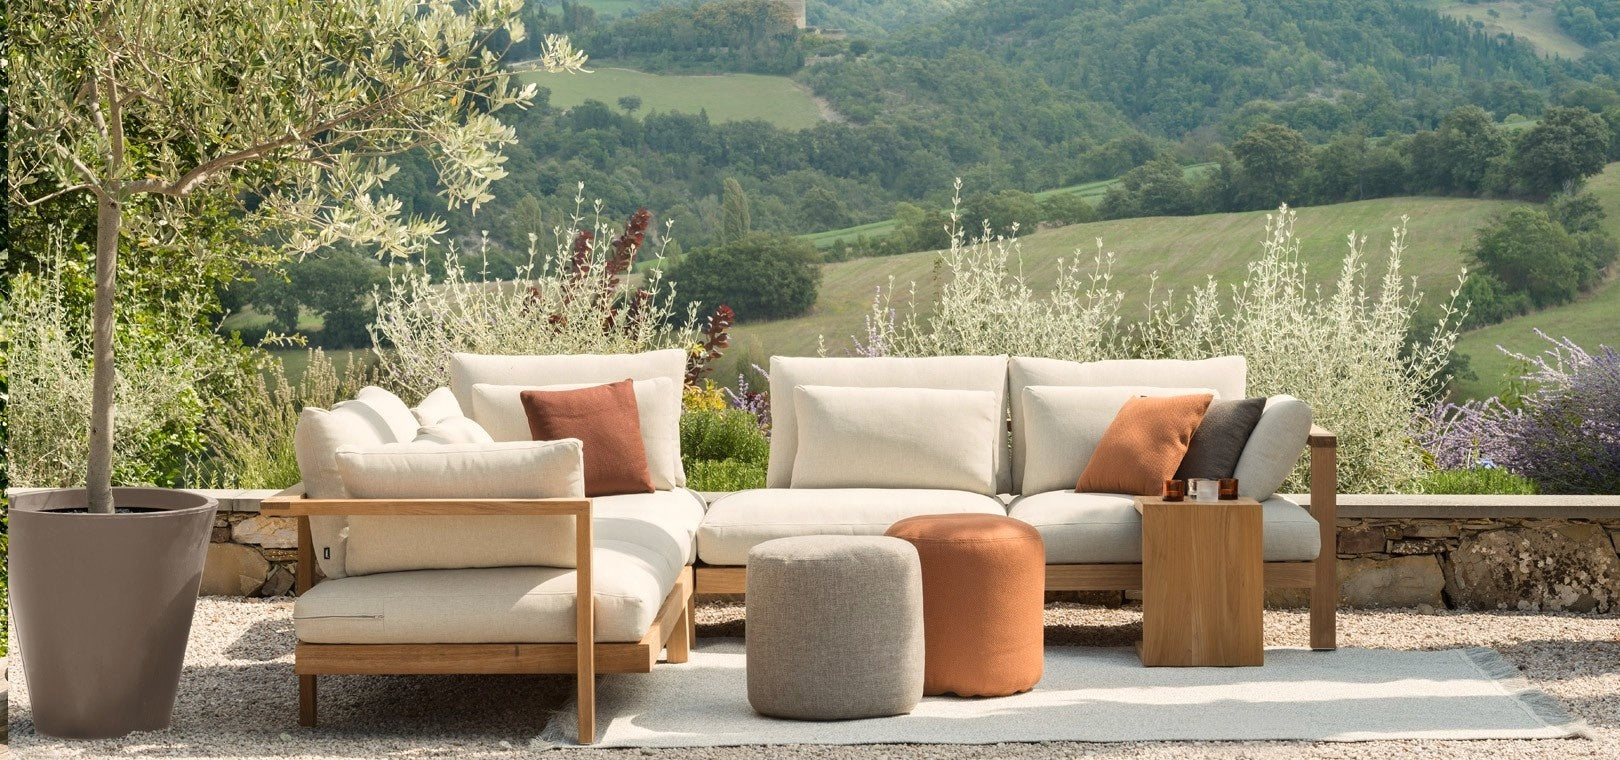 ASCIANO OUTDOOR LOUNGE SETTING